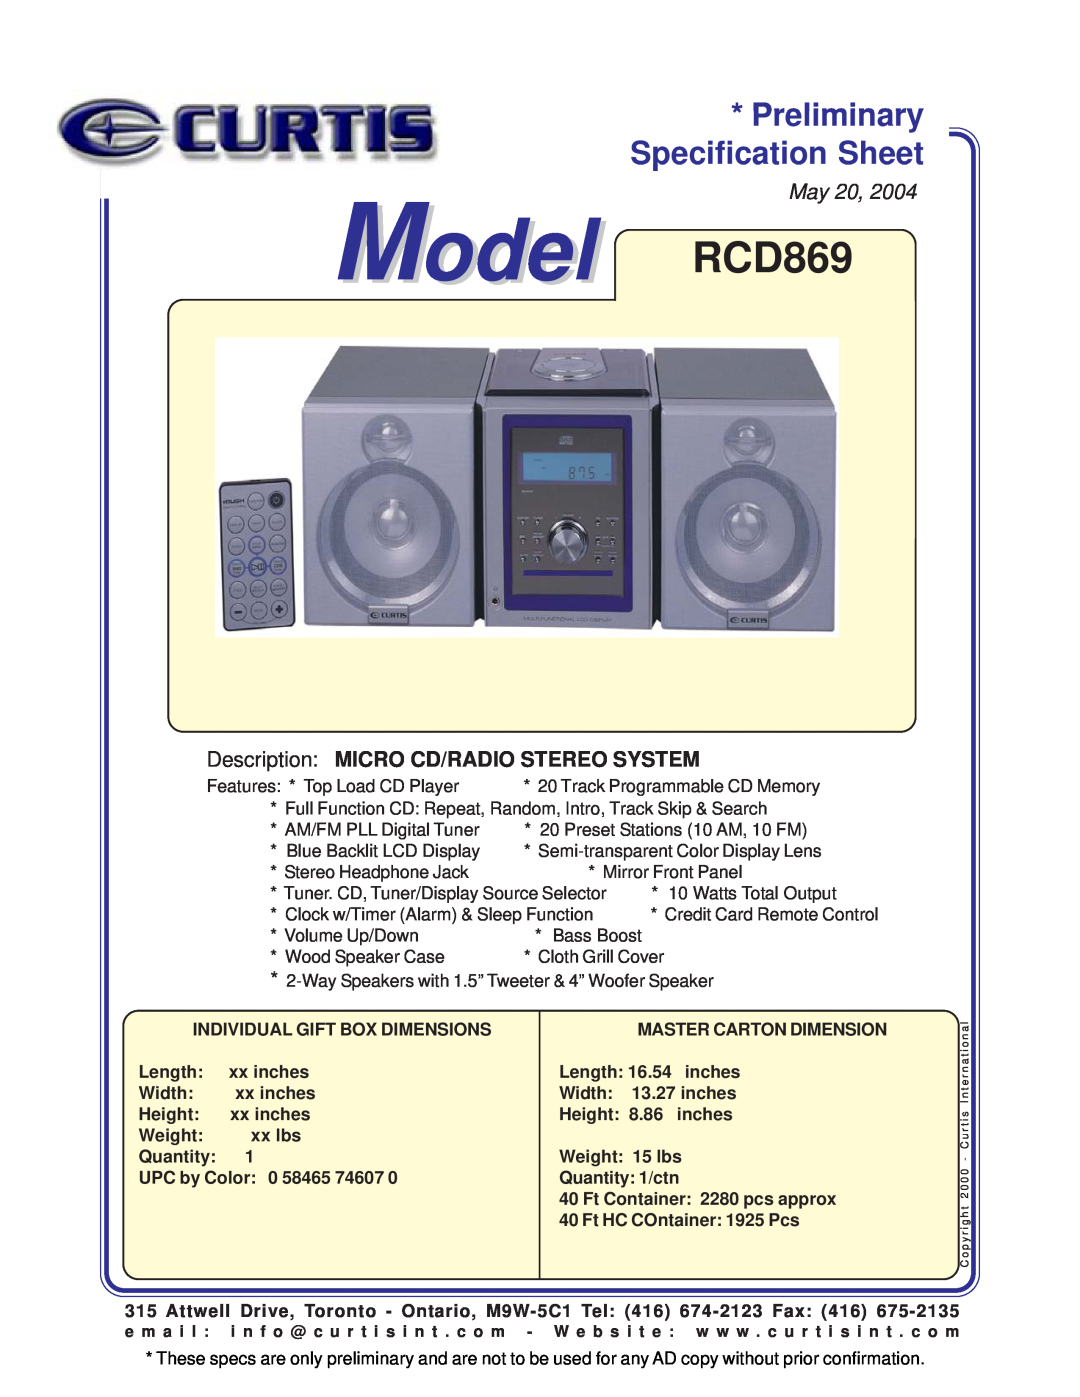 Curtis specifications Specification Sheet, Model RCD869, Preliminary, May, Description MICRO CD/RADIO STEREO SYSTEM 